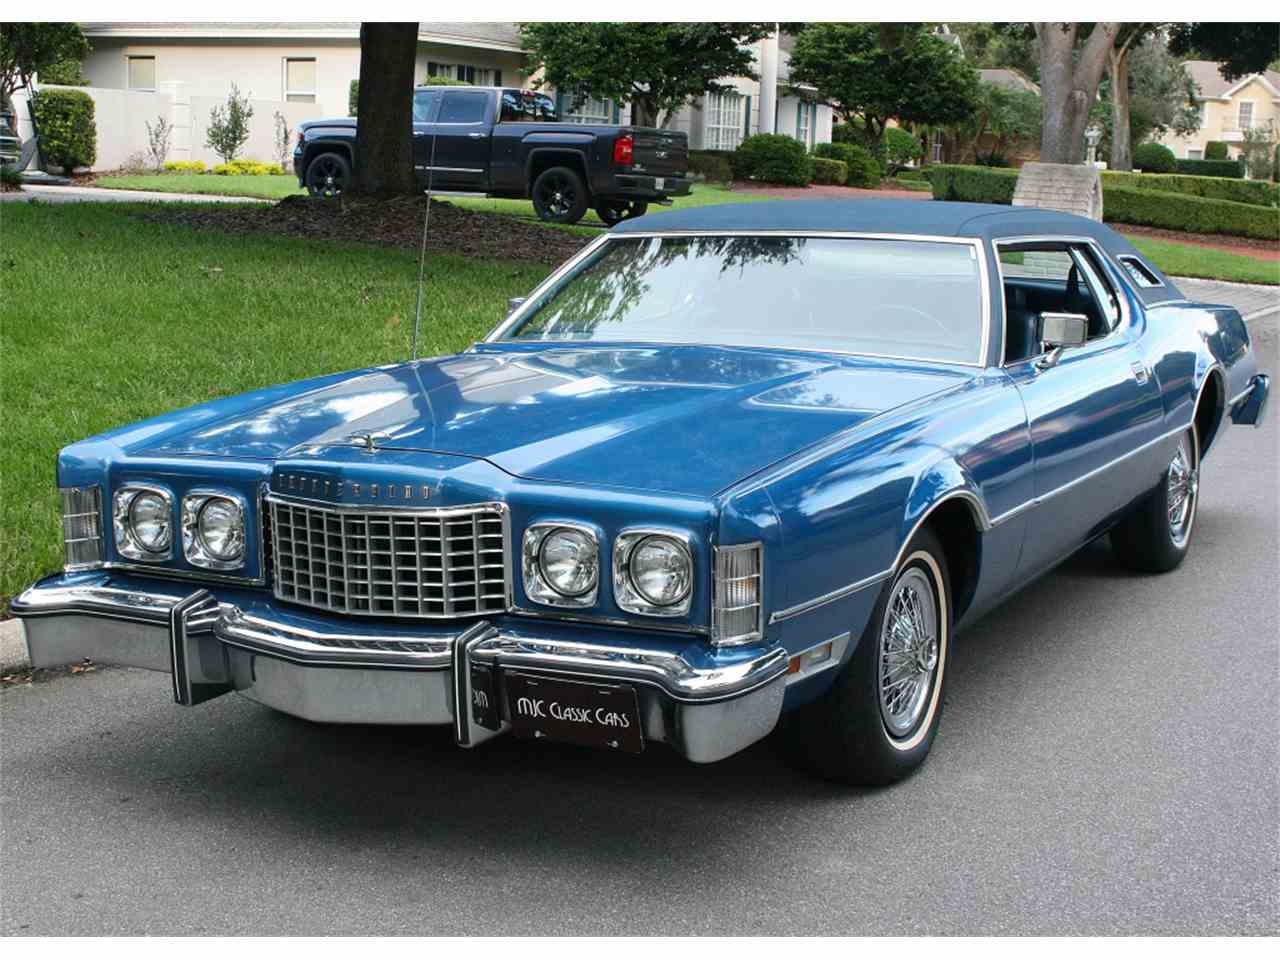 1976 Ford Thunderbird Coupe #3.